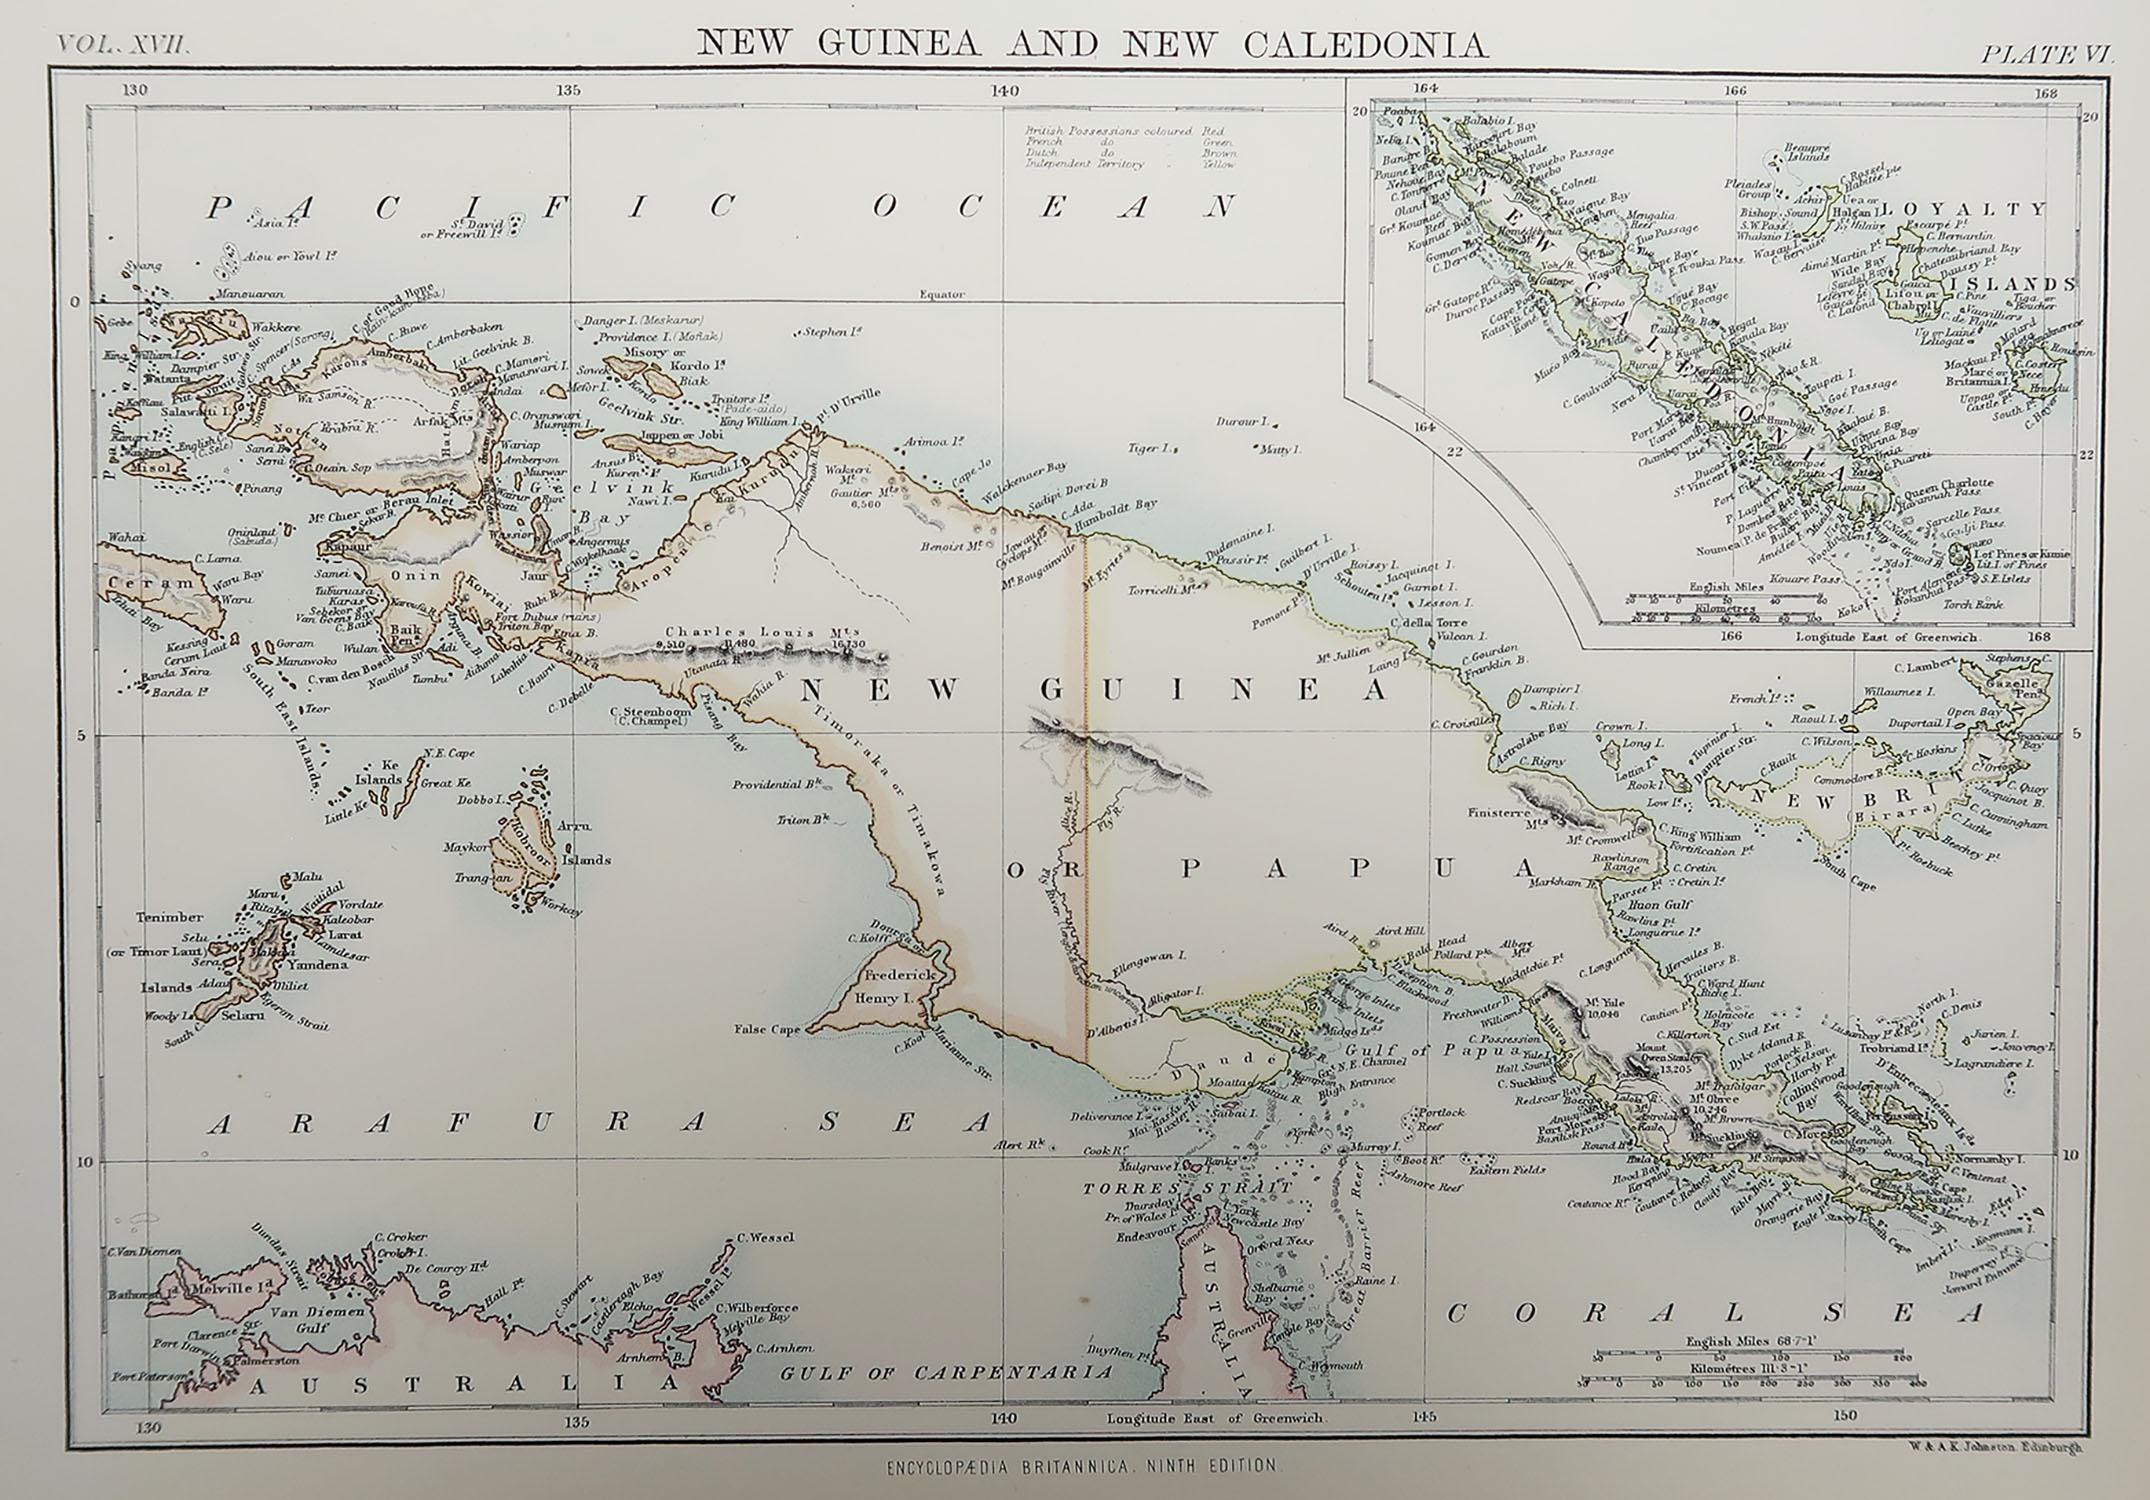 Great map of Papua New Guinea

Drawn and Engraved by W. & A.K. Johnston

Published By A & C Black, Edinburgh.

Original colour

Unframed.








 